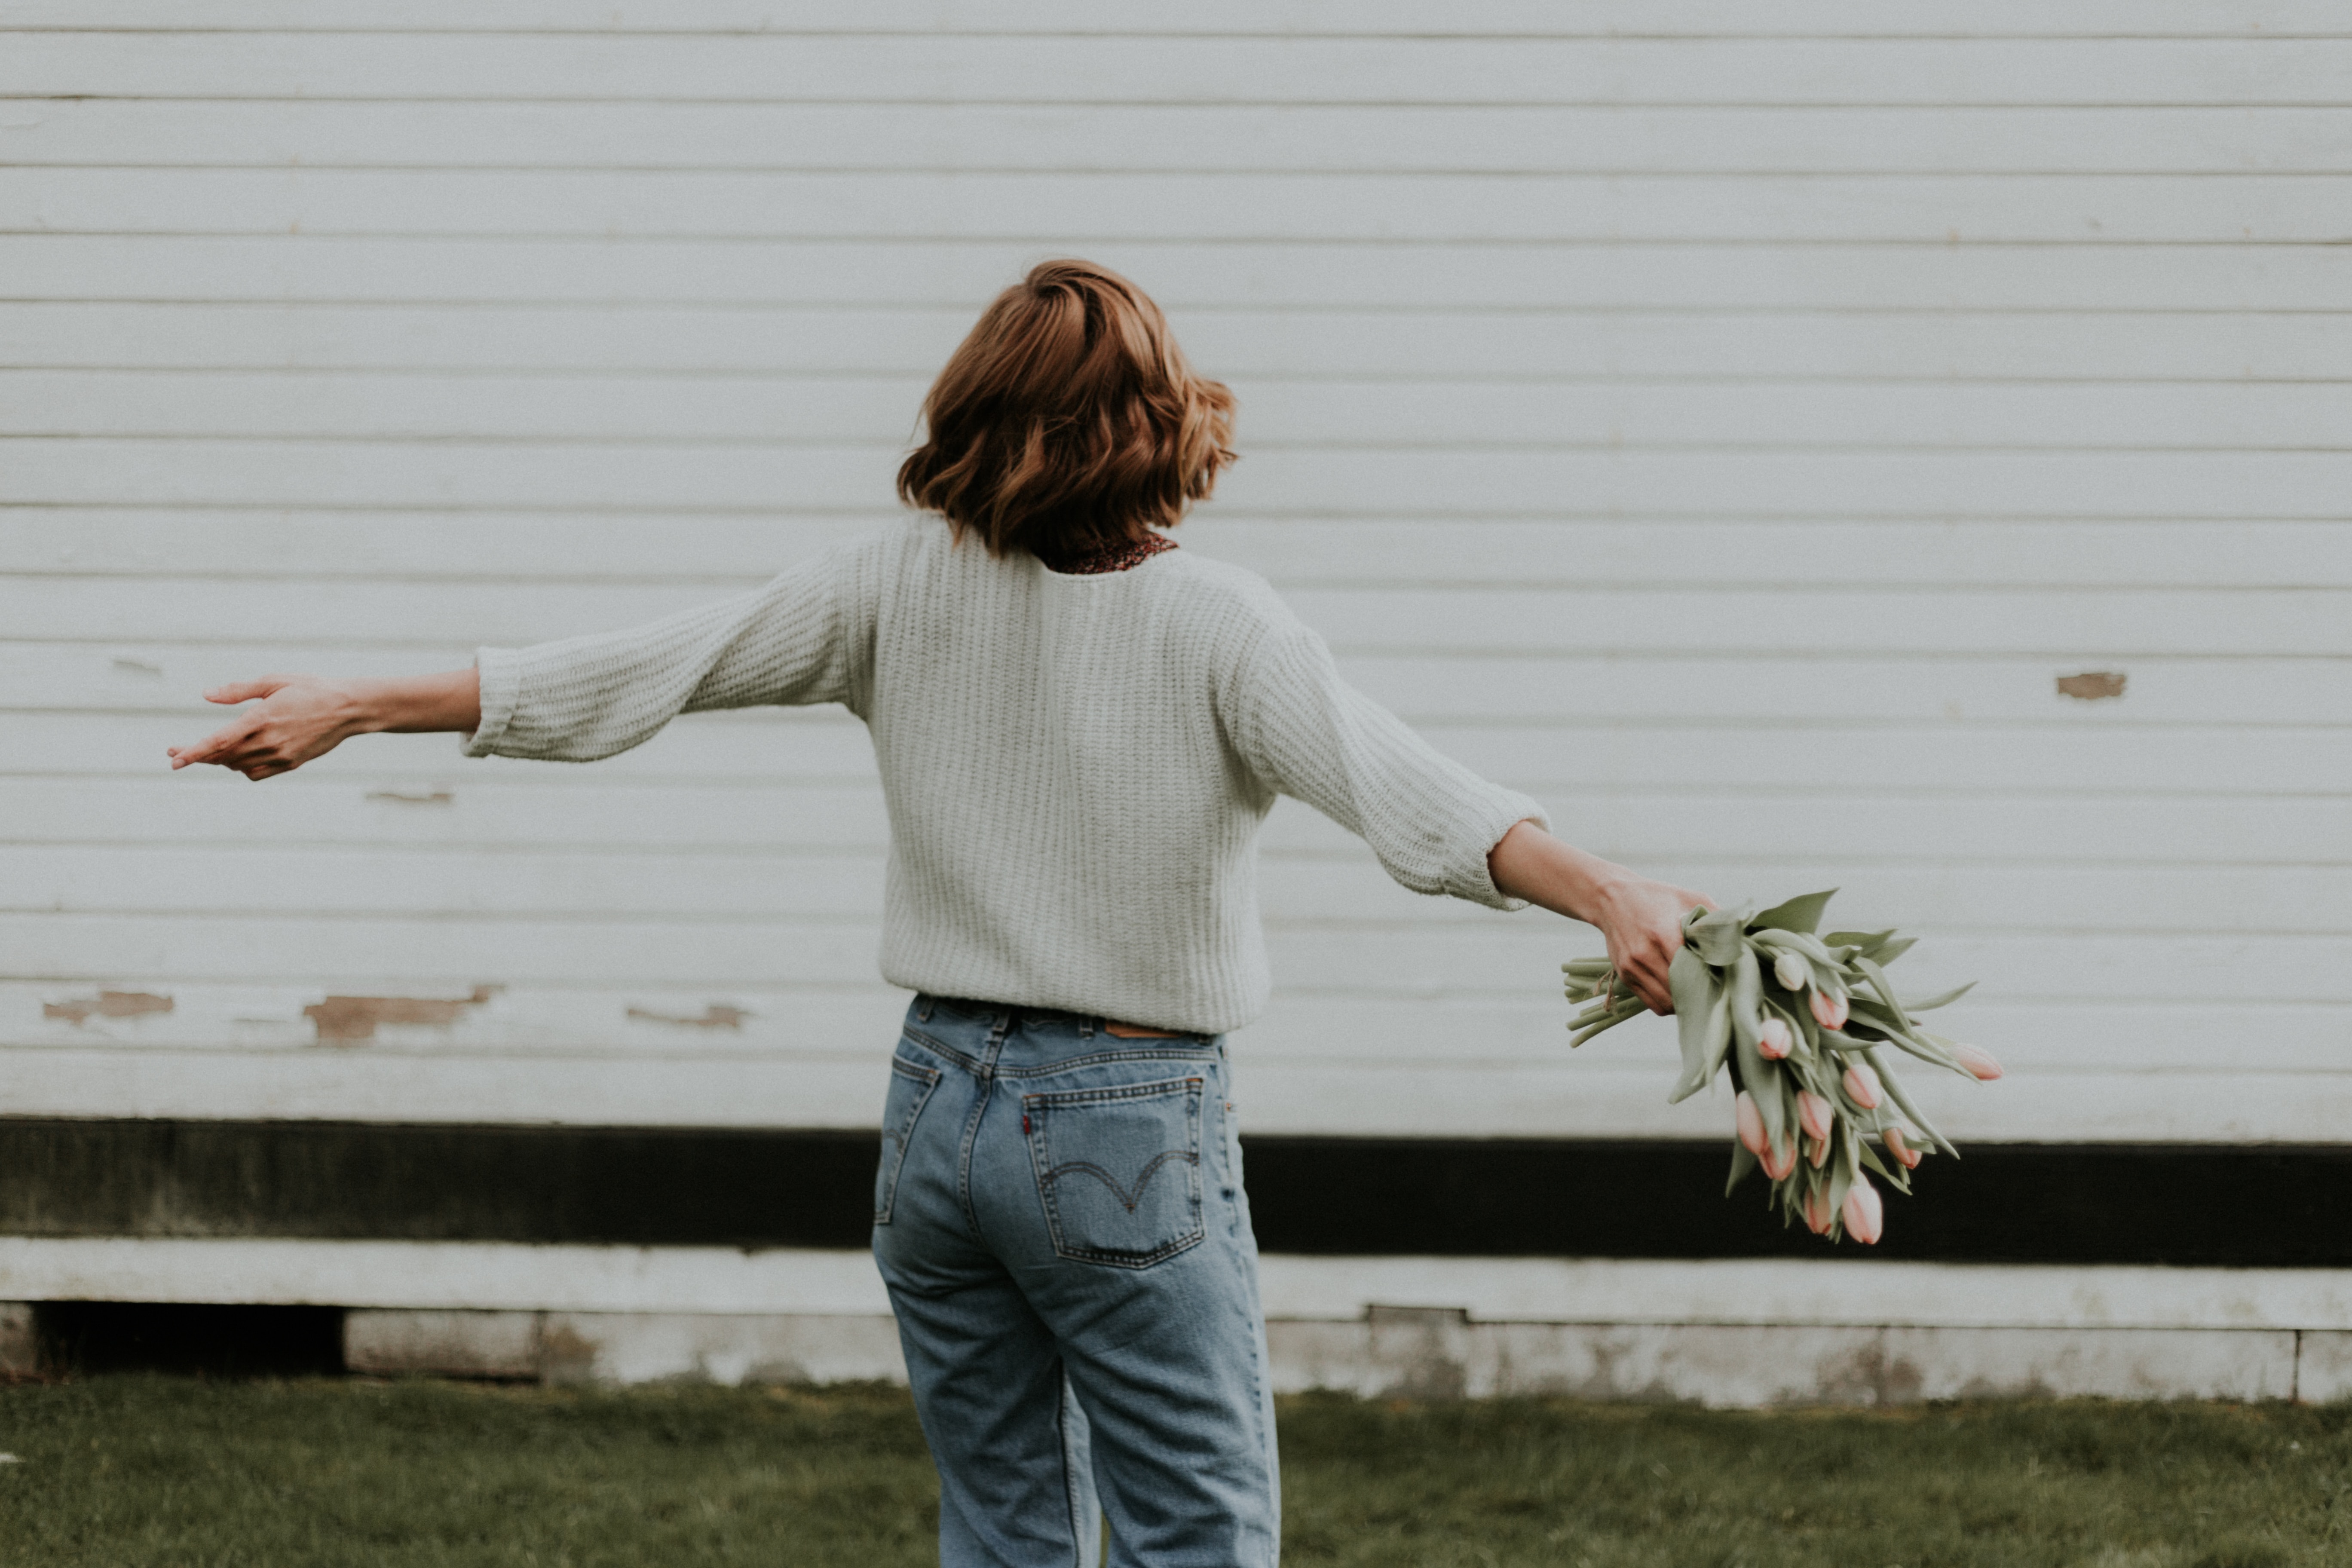 A woman spreading her arms while holding flowers.│Source: Unsplash